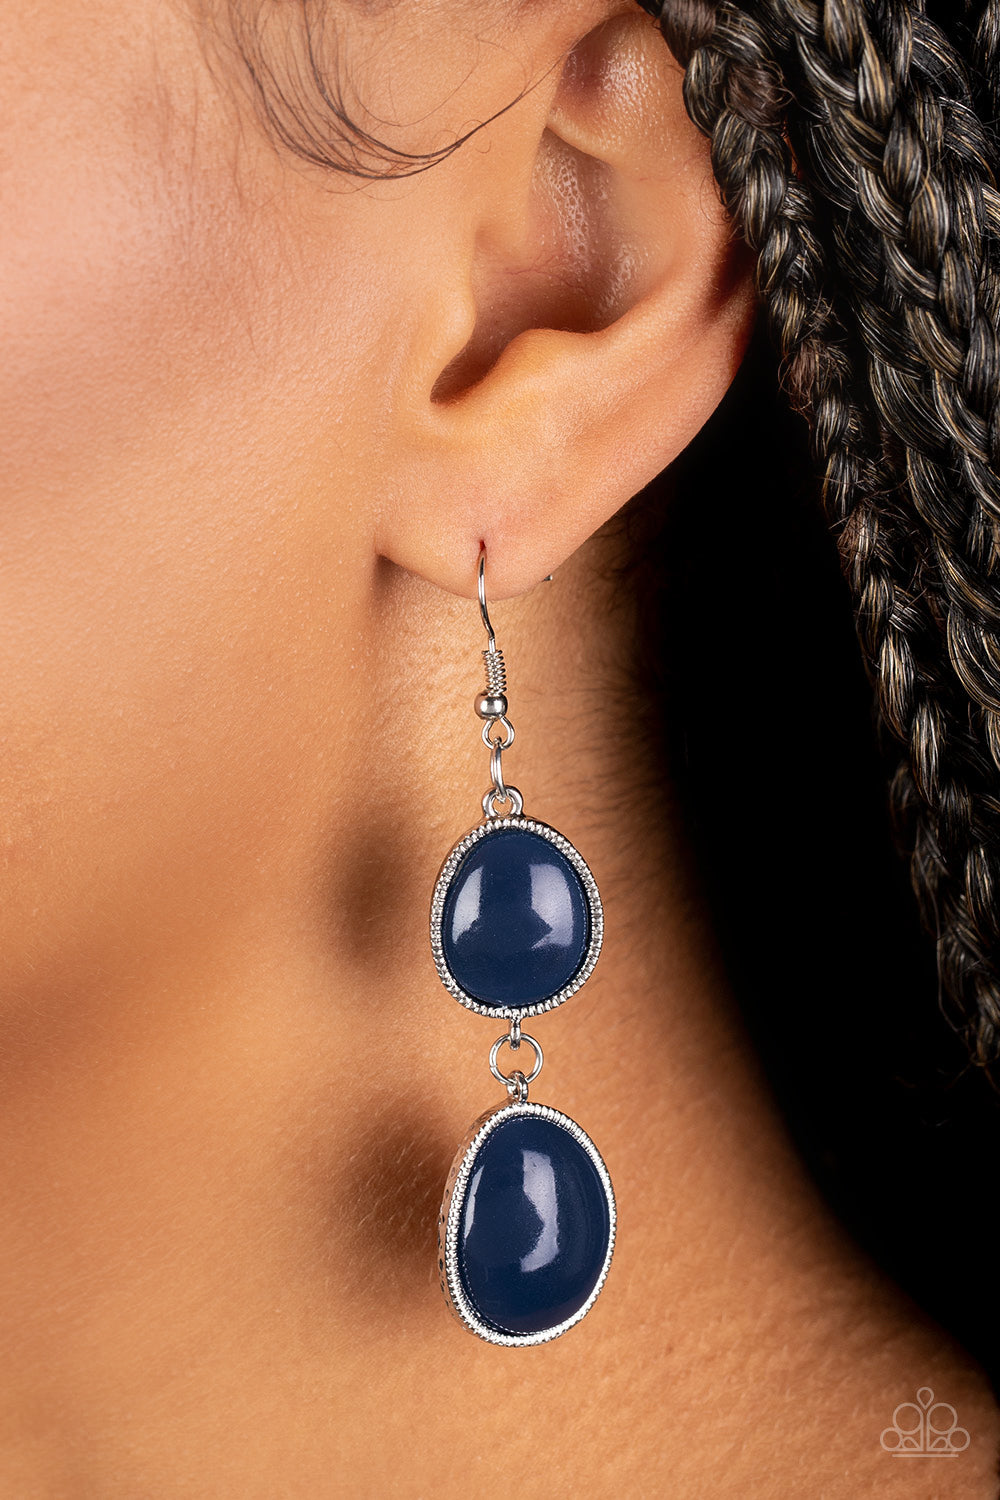 Set in textured silver frames, two asymmetrical navy blue beads link into a colorful lure for a summery fashion. Earring attaches to a standard fishhook fitting. /P>  Sold as one pair of earrings.